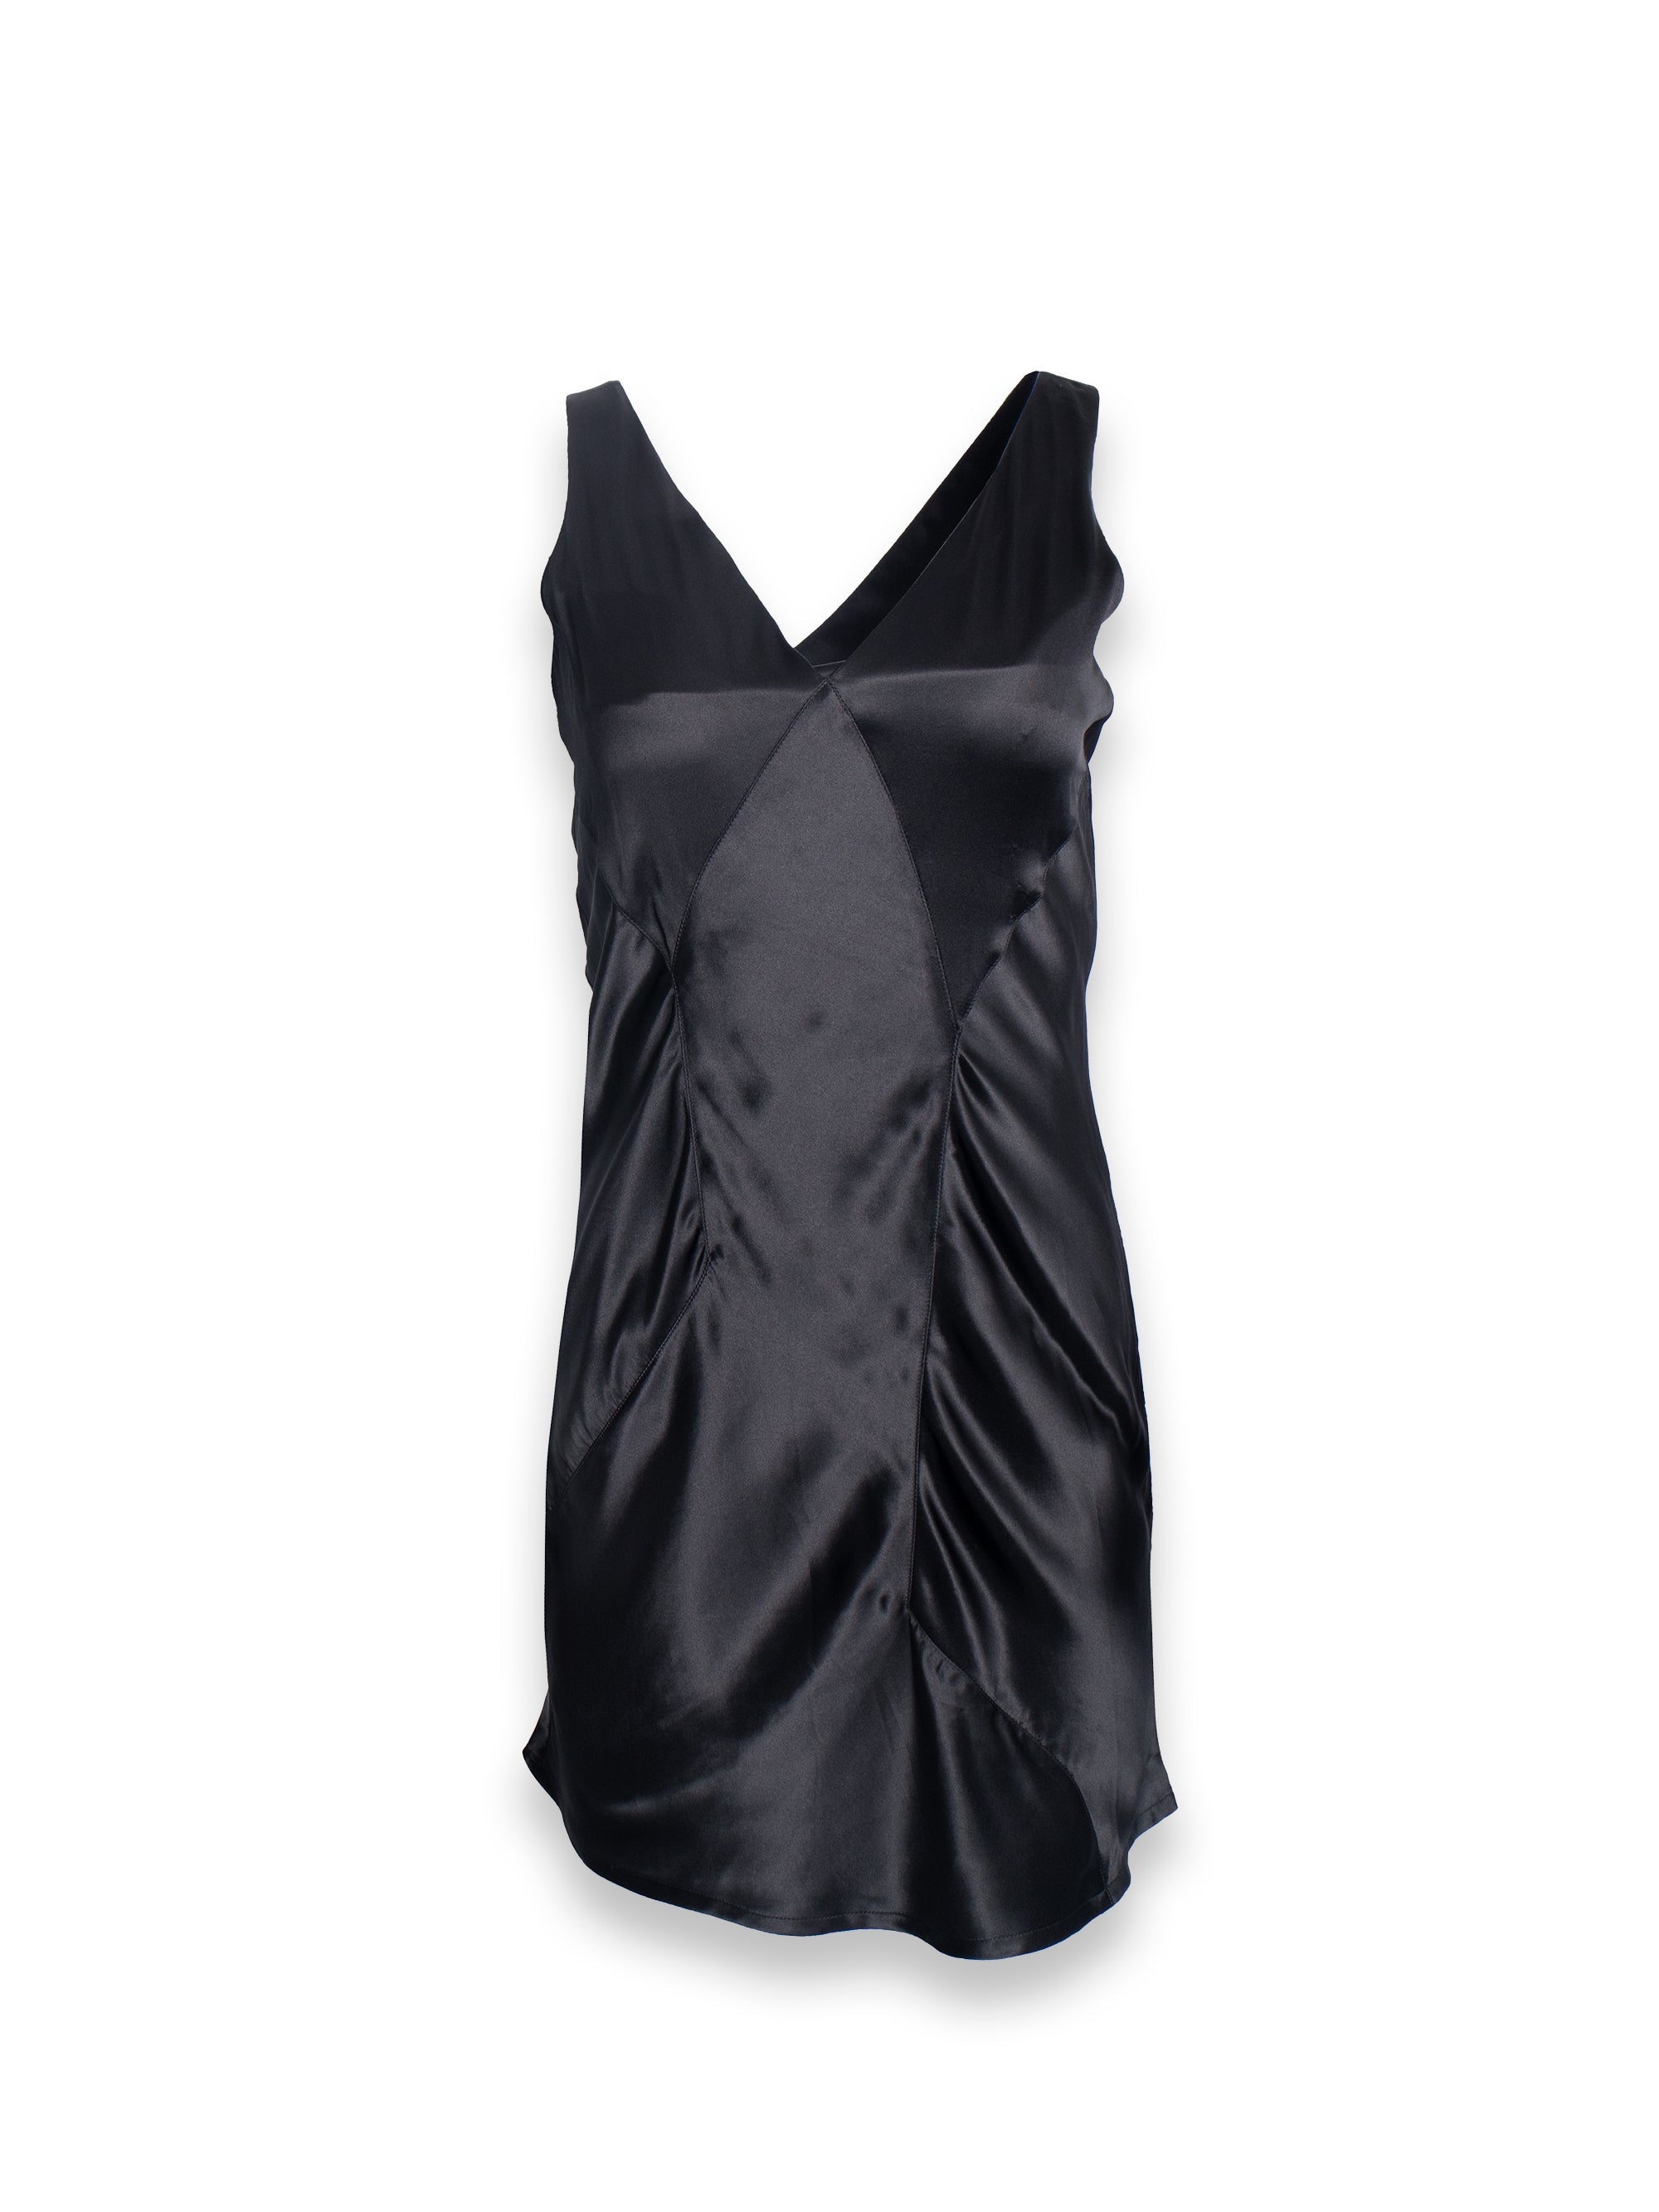 Black Silk Dress with Runched Details and An Assymetric Neckline